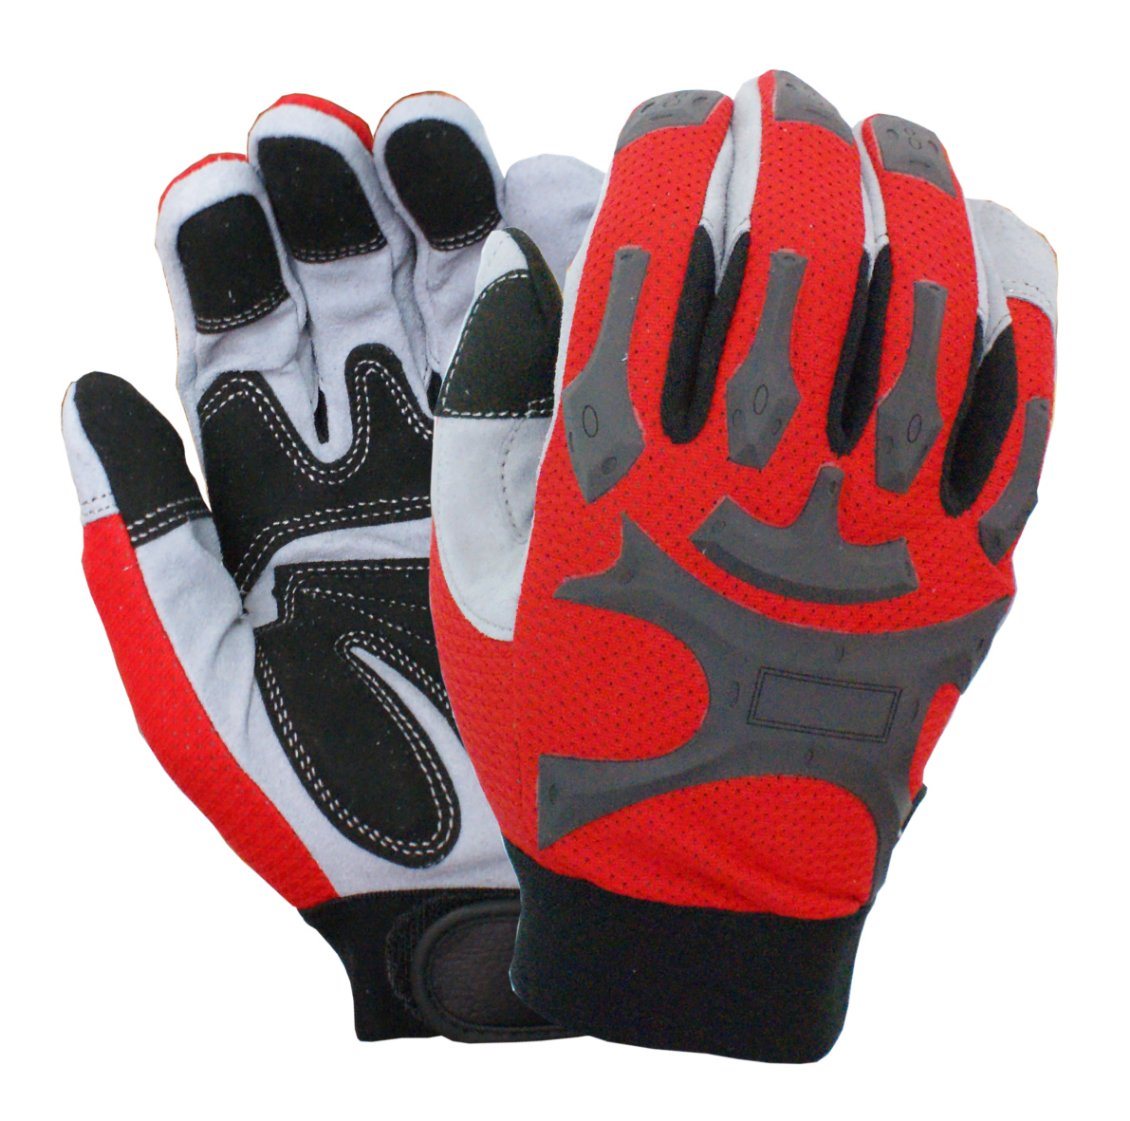 TPR Impact Resistant Mechanical Safety Work Gloves with Microfiber Palm